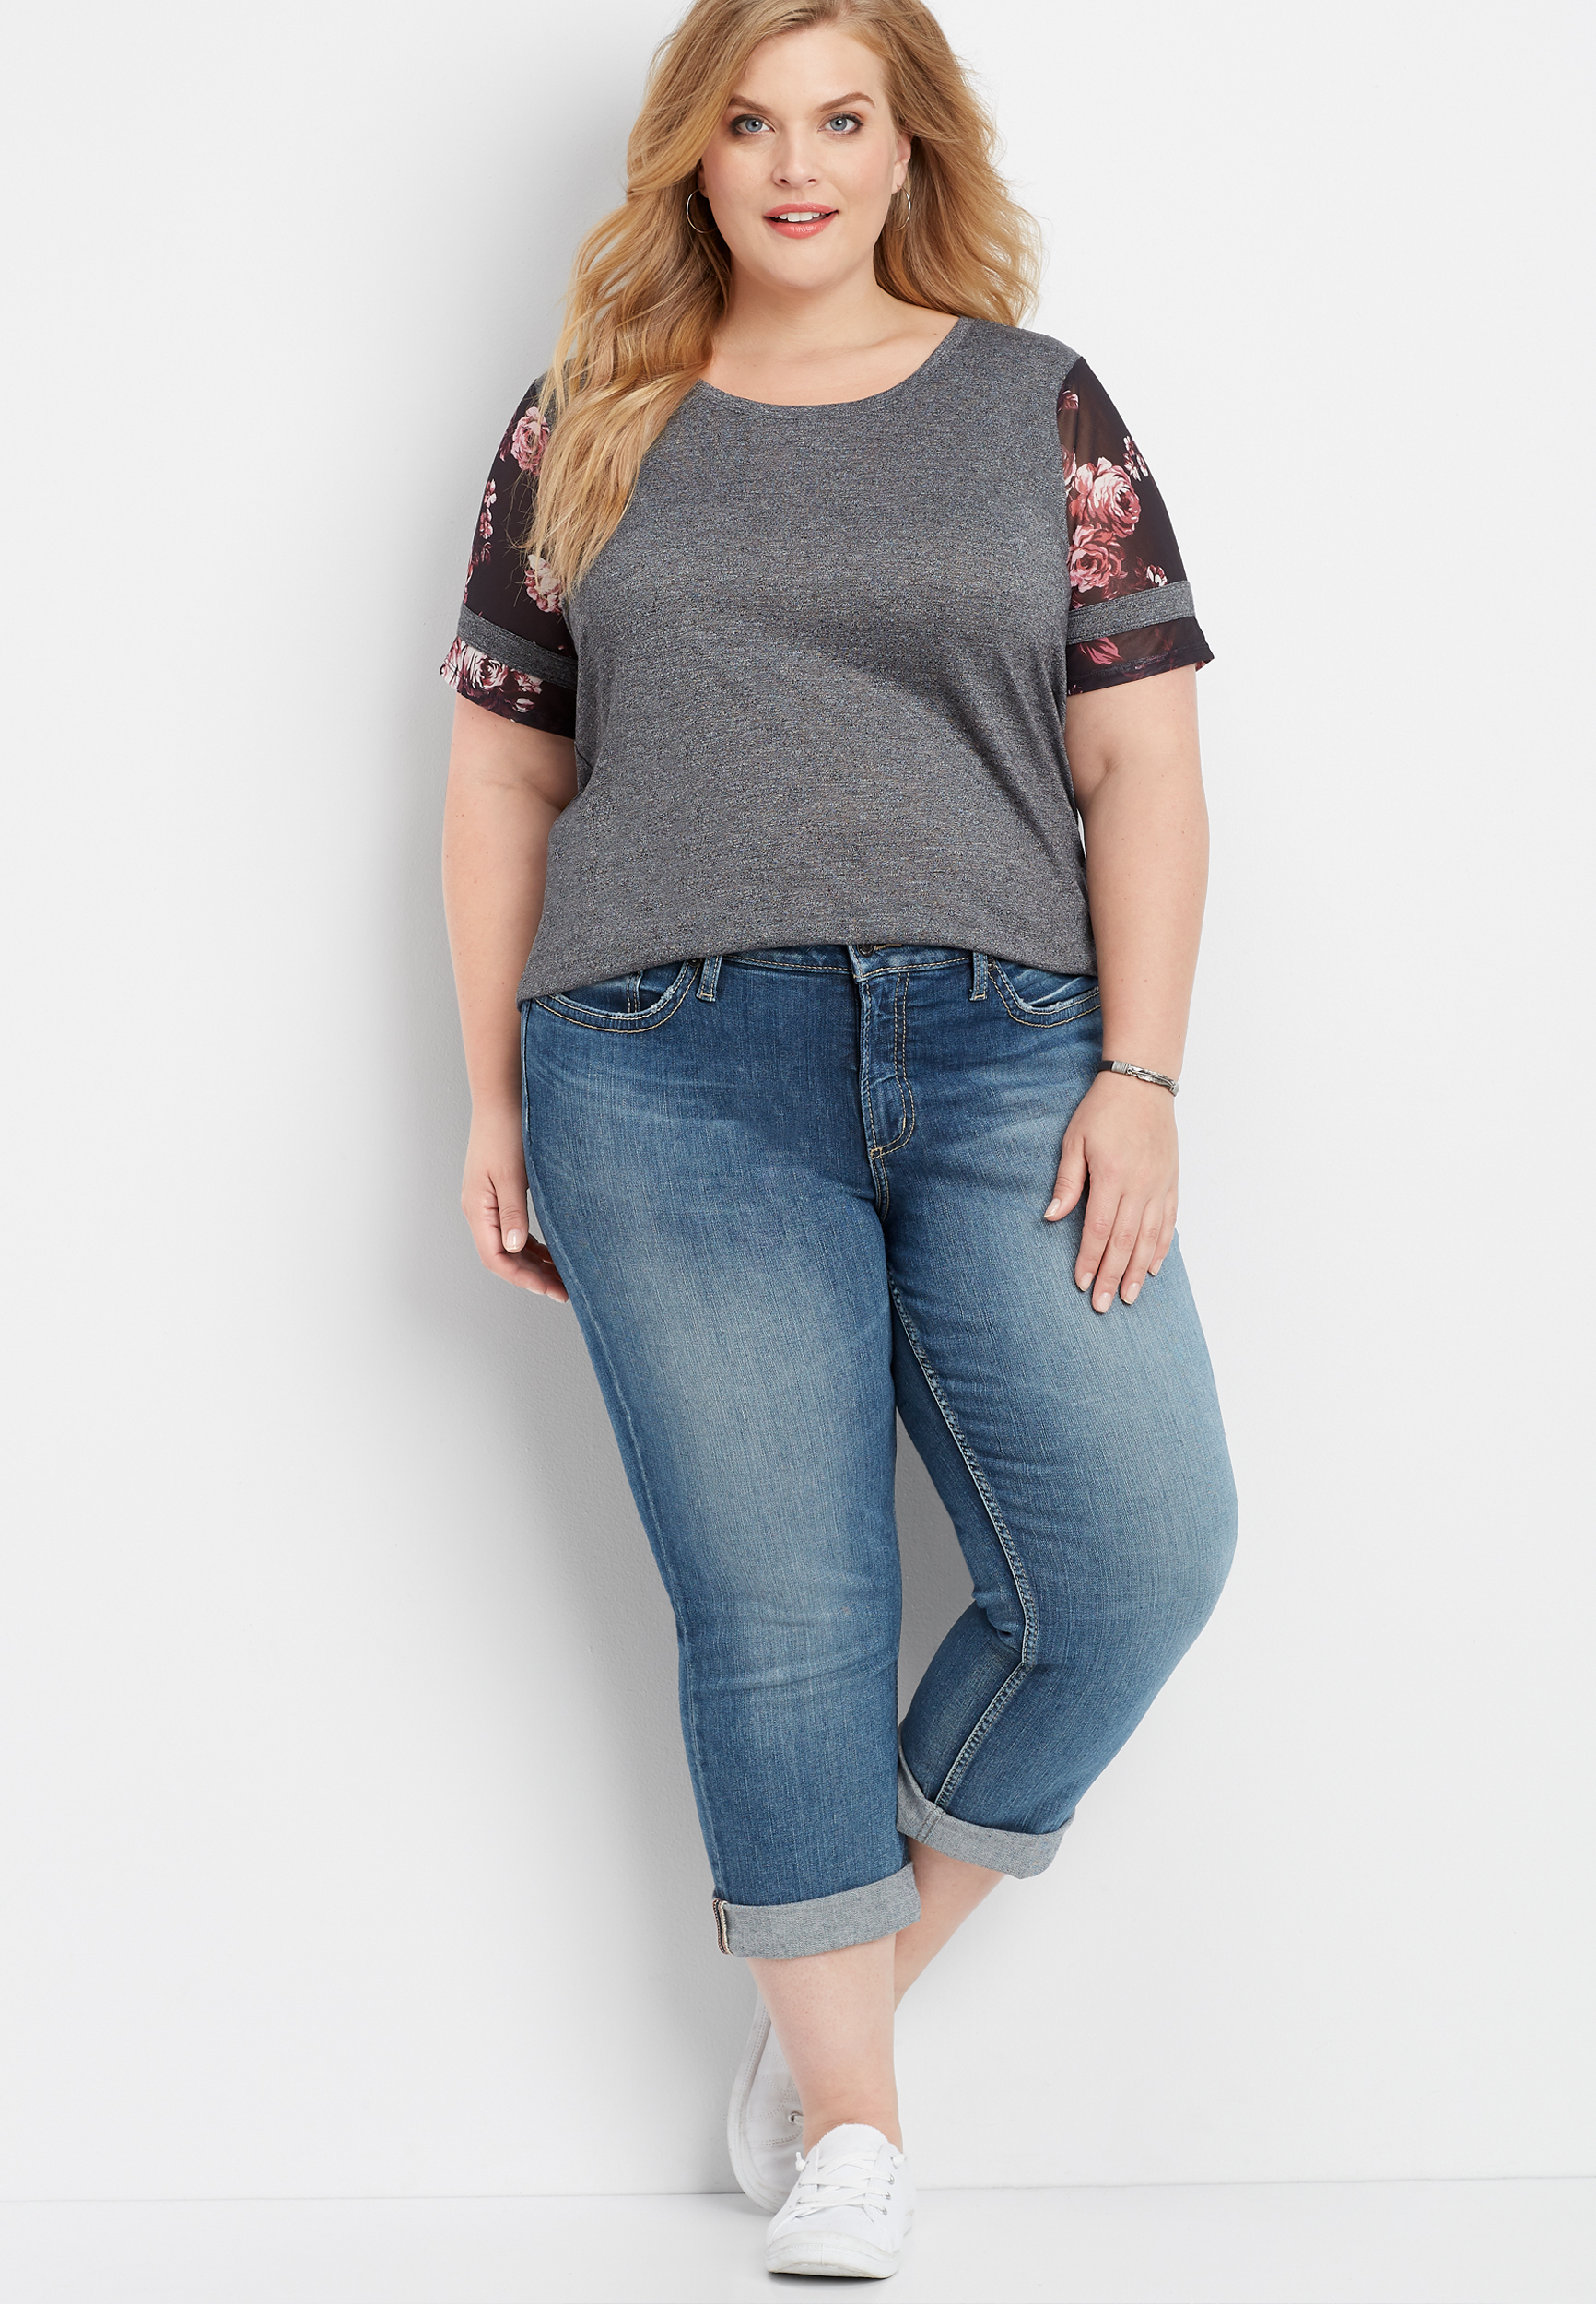 plus size jeans and sneakers